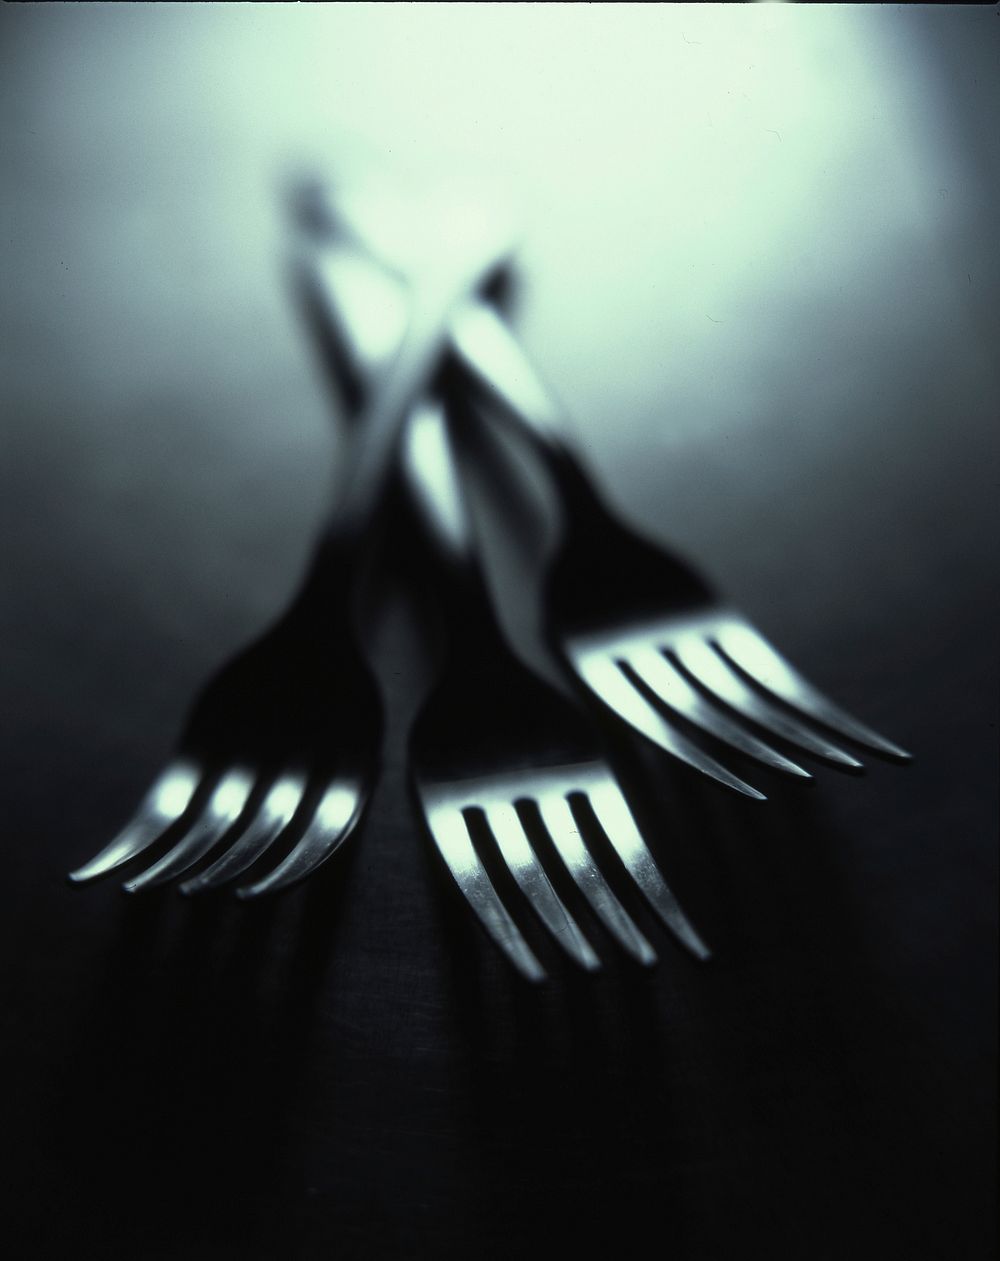 Three forks staked on the table. Original public domain image from Wikimedia Commons